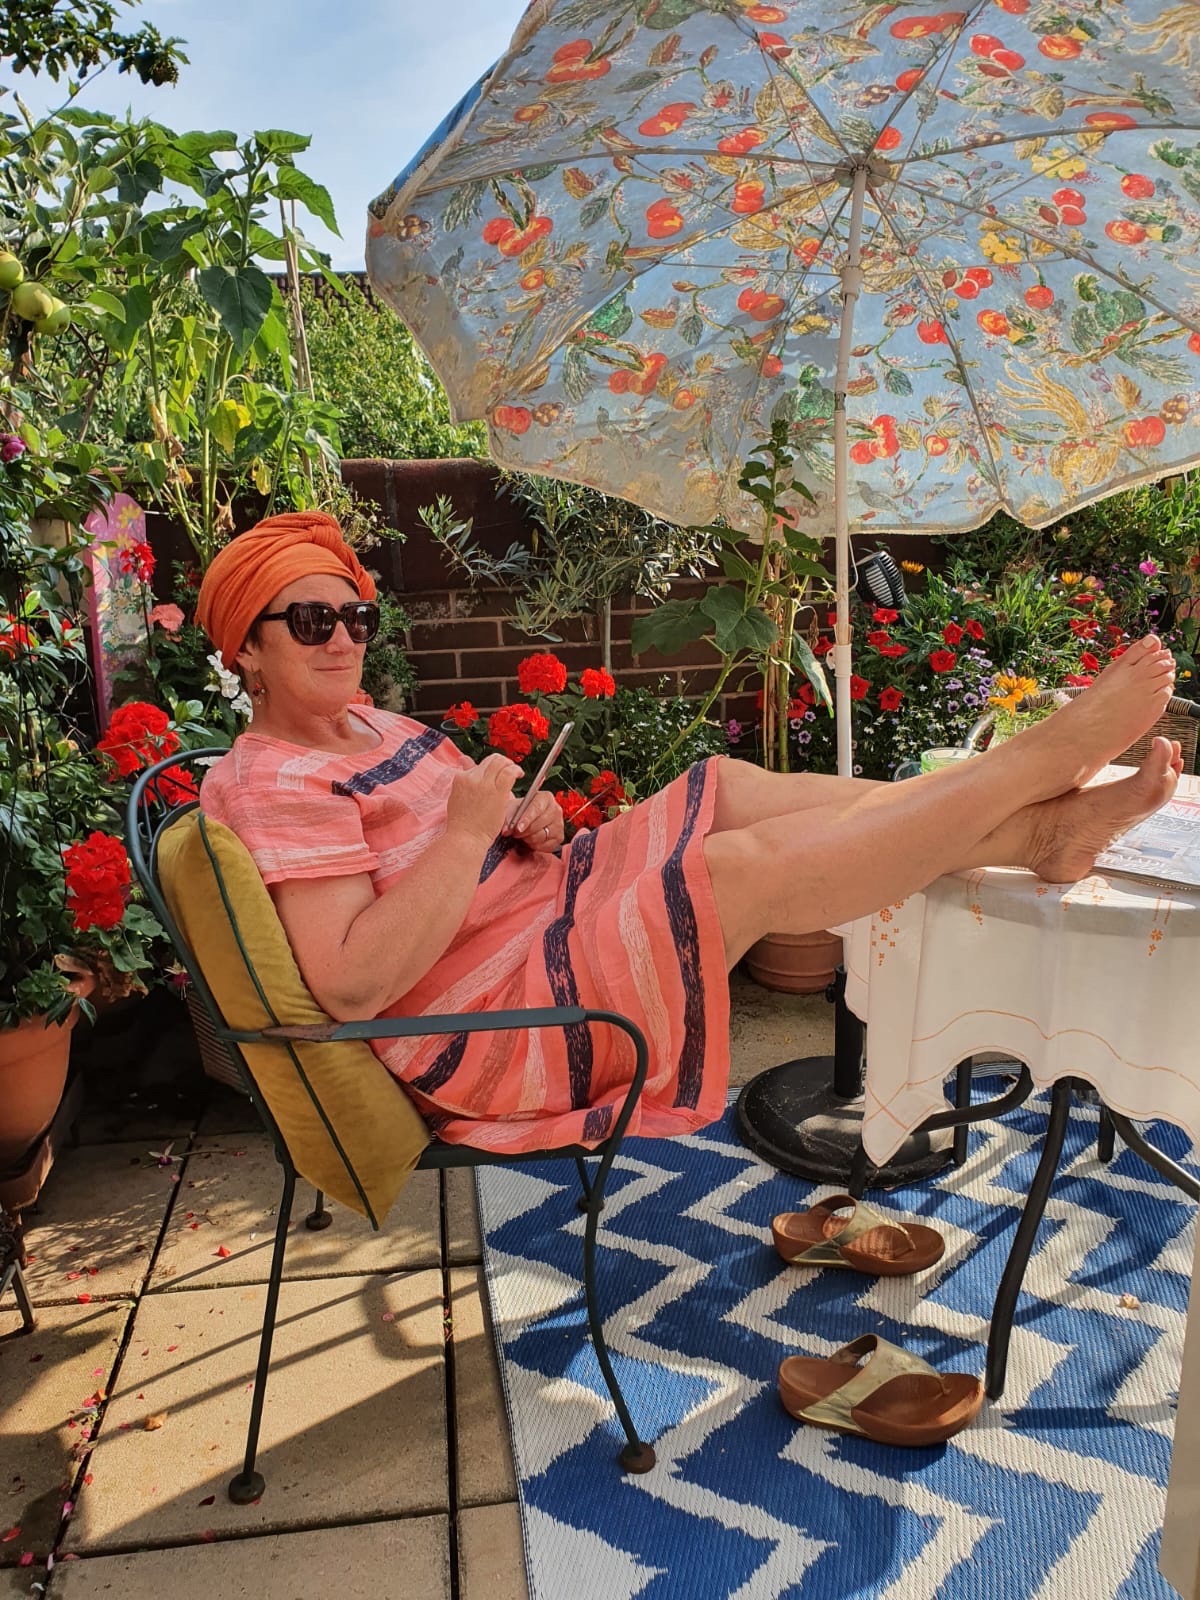 A woman sitting in a chair on a patio under an umbrella.